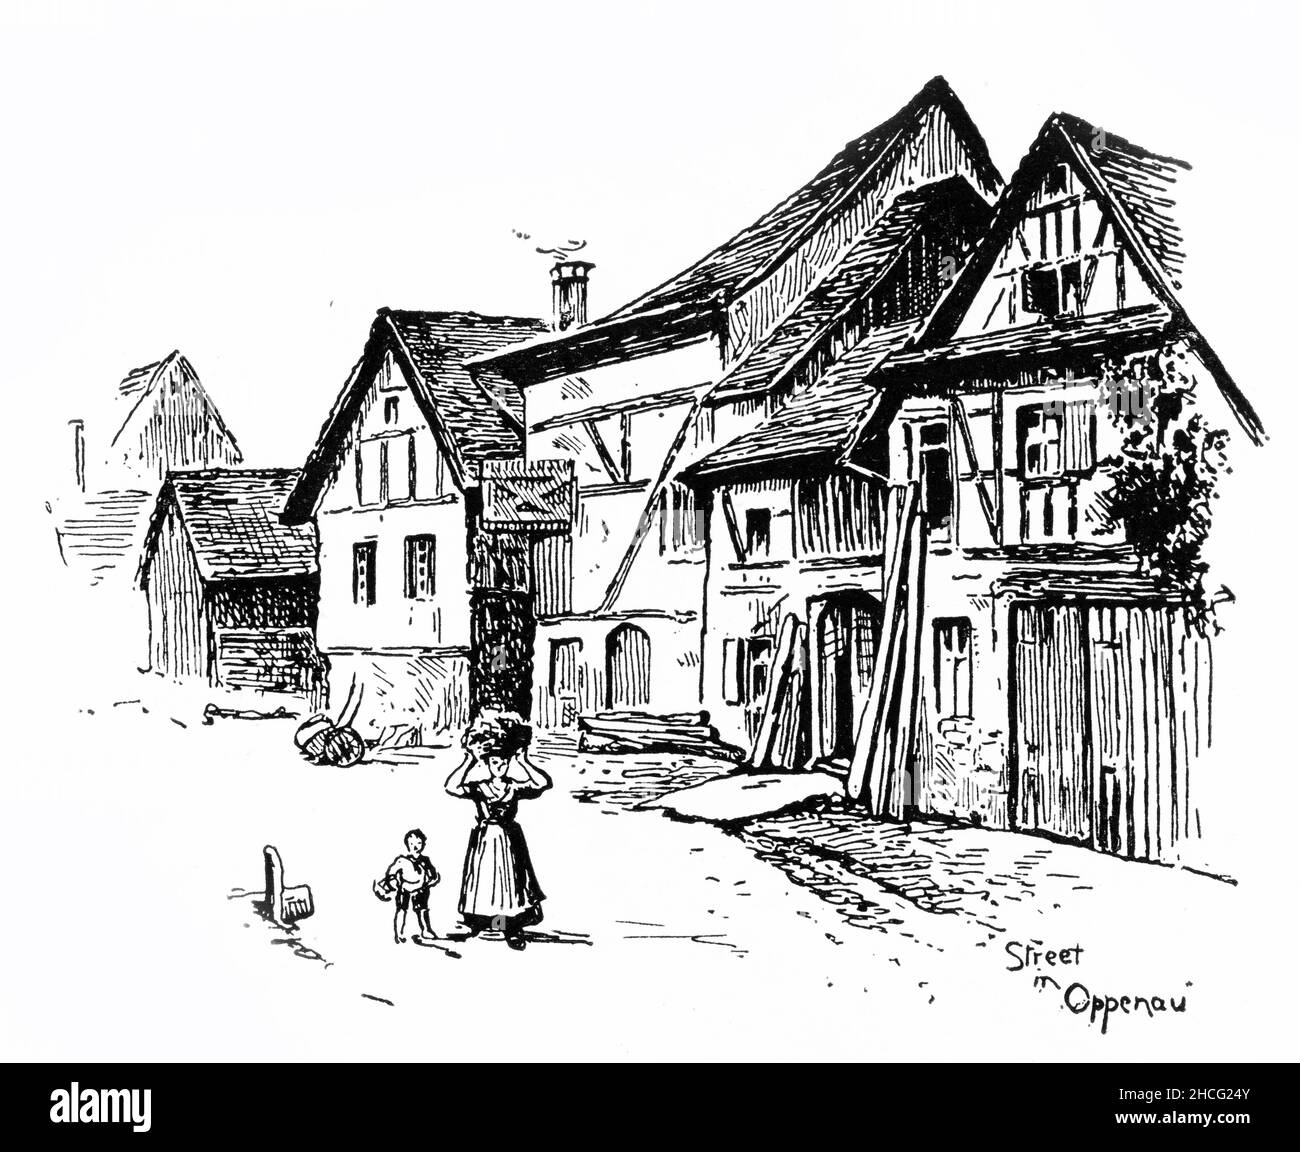 Engraving of a street in Oppenau, published circa 1910 Stock Photo